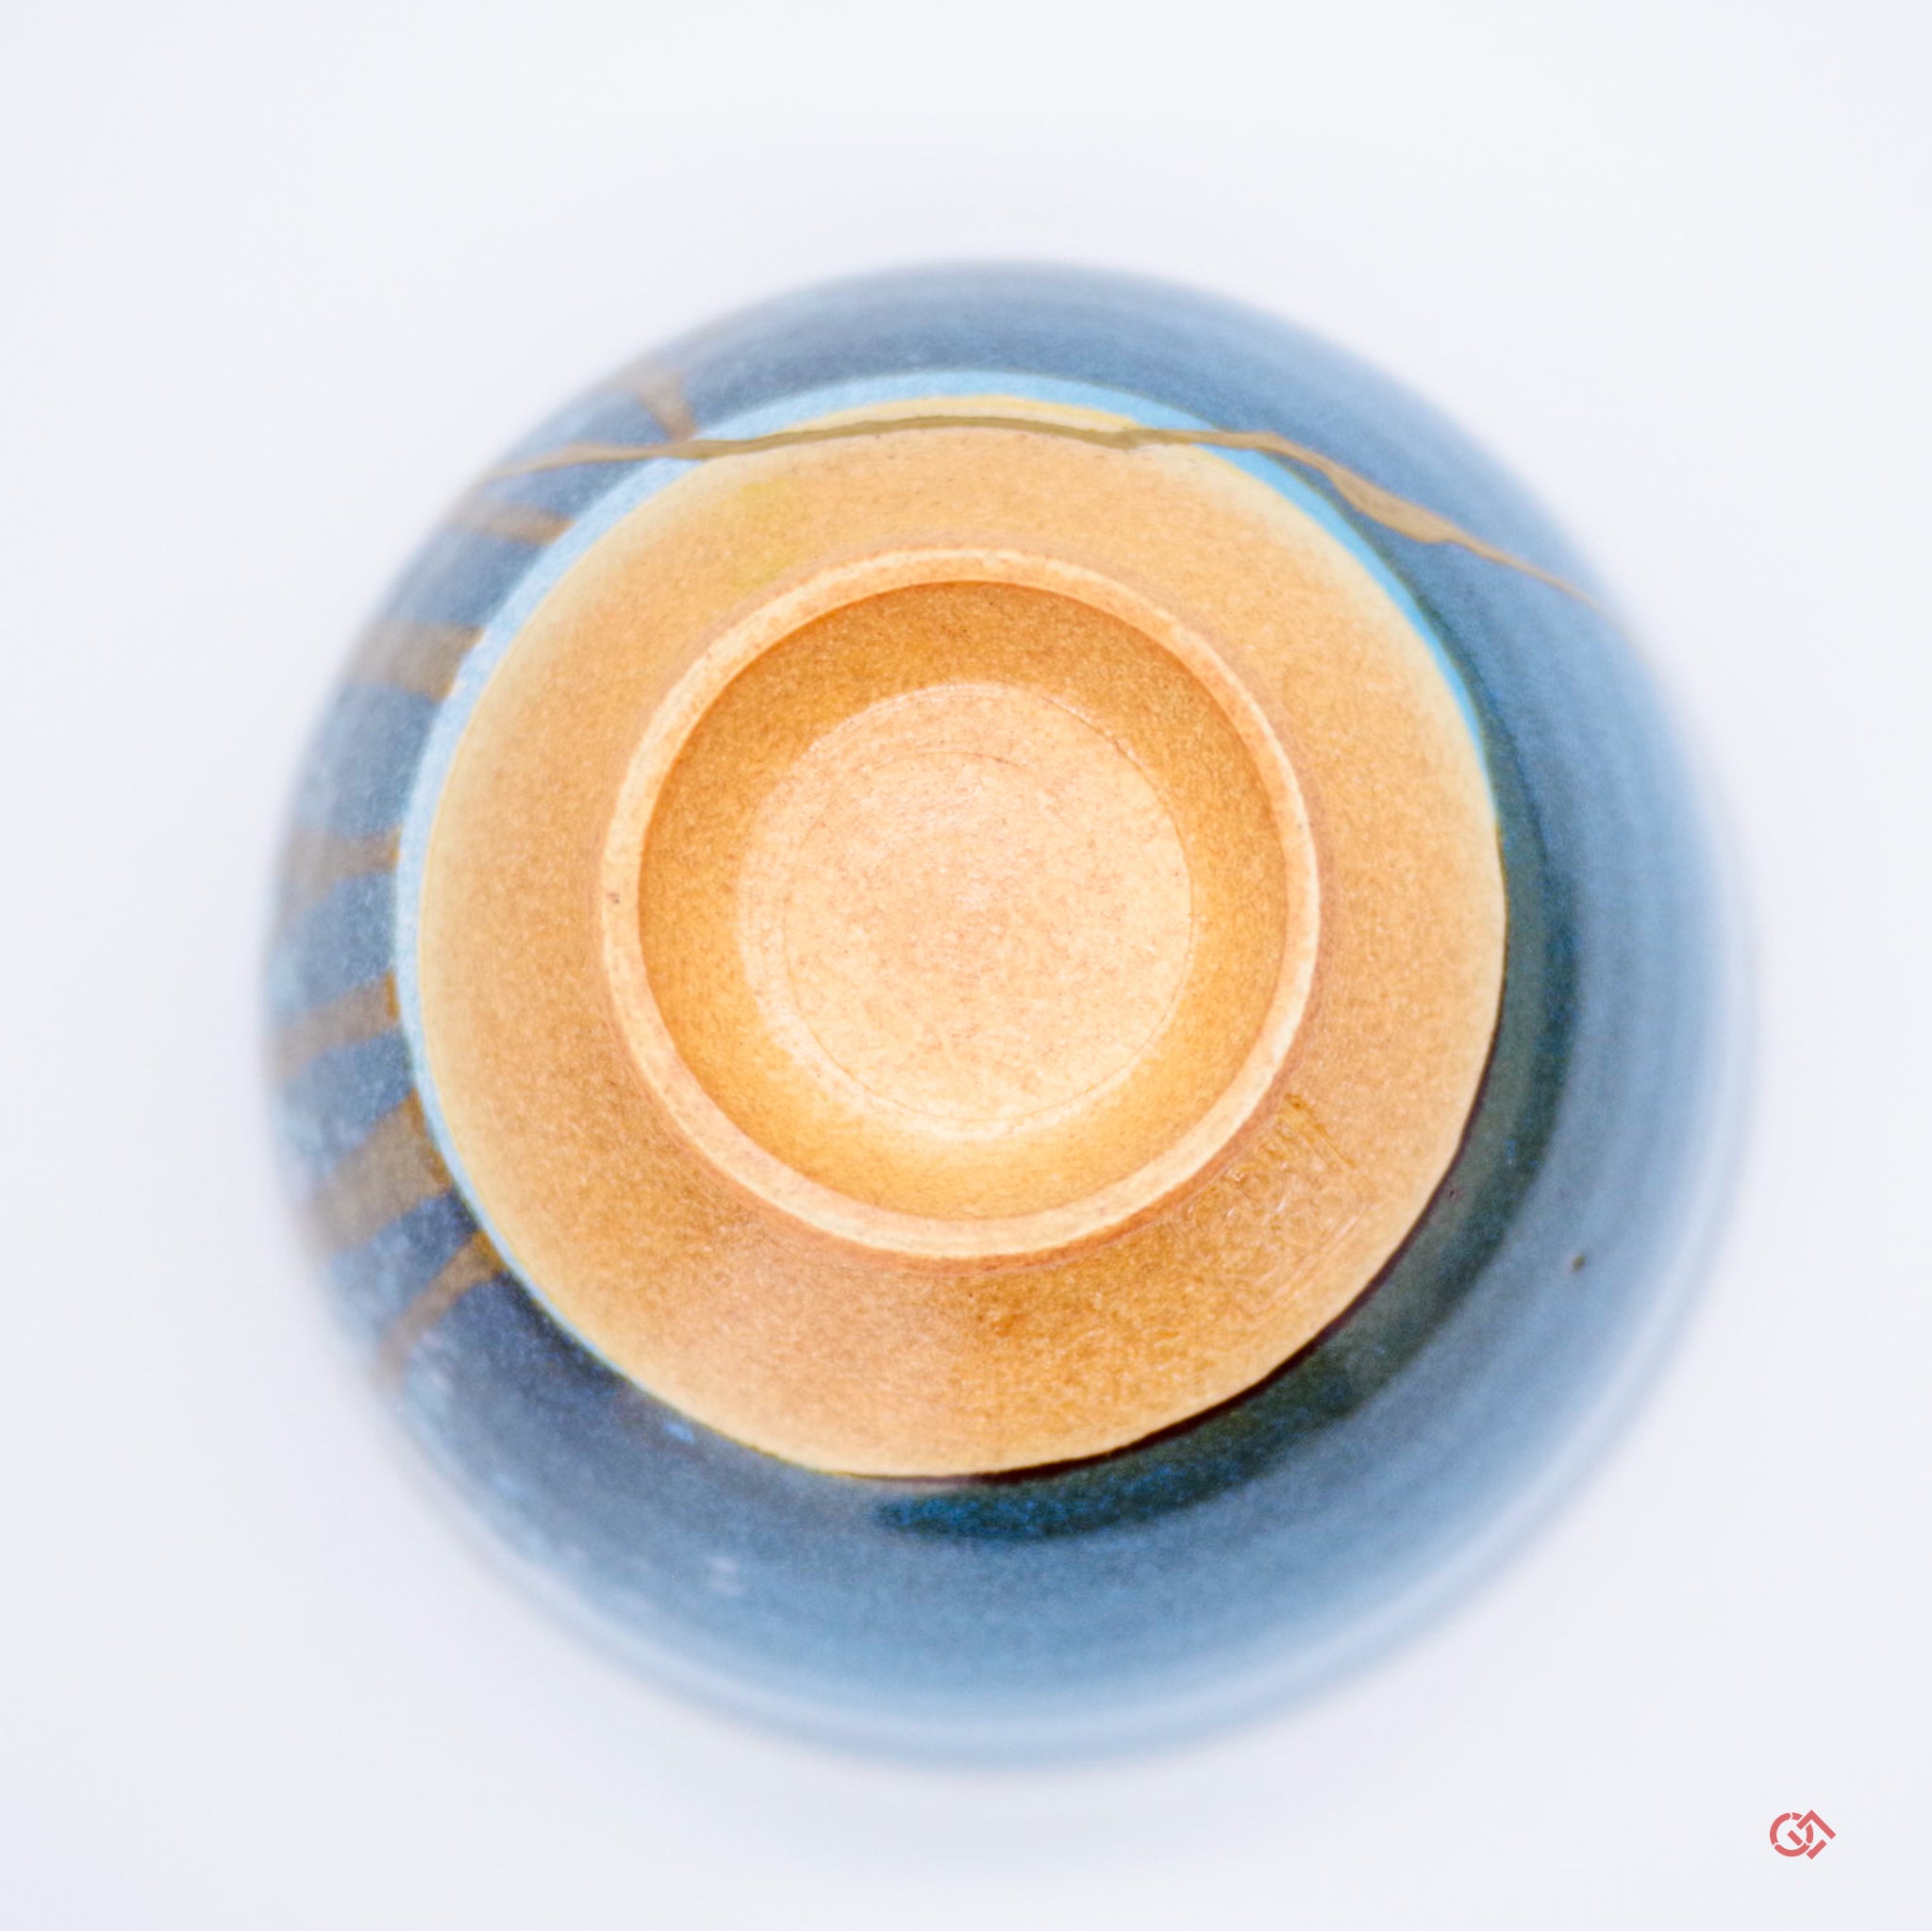 Youkoya Authentic 24k Kintsugi Bowl - Hand-Crafted in Shigaraki, Japan -  Real 24k Gold - Perfect for Traditional Matcha Tea - One of a Kind Piece of